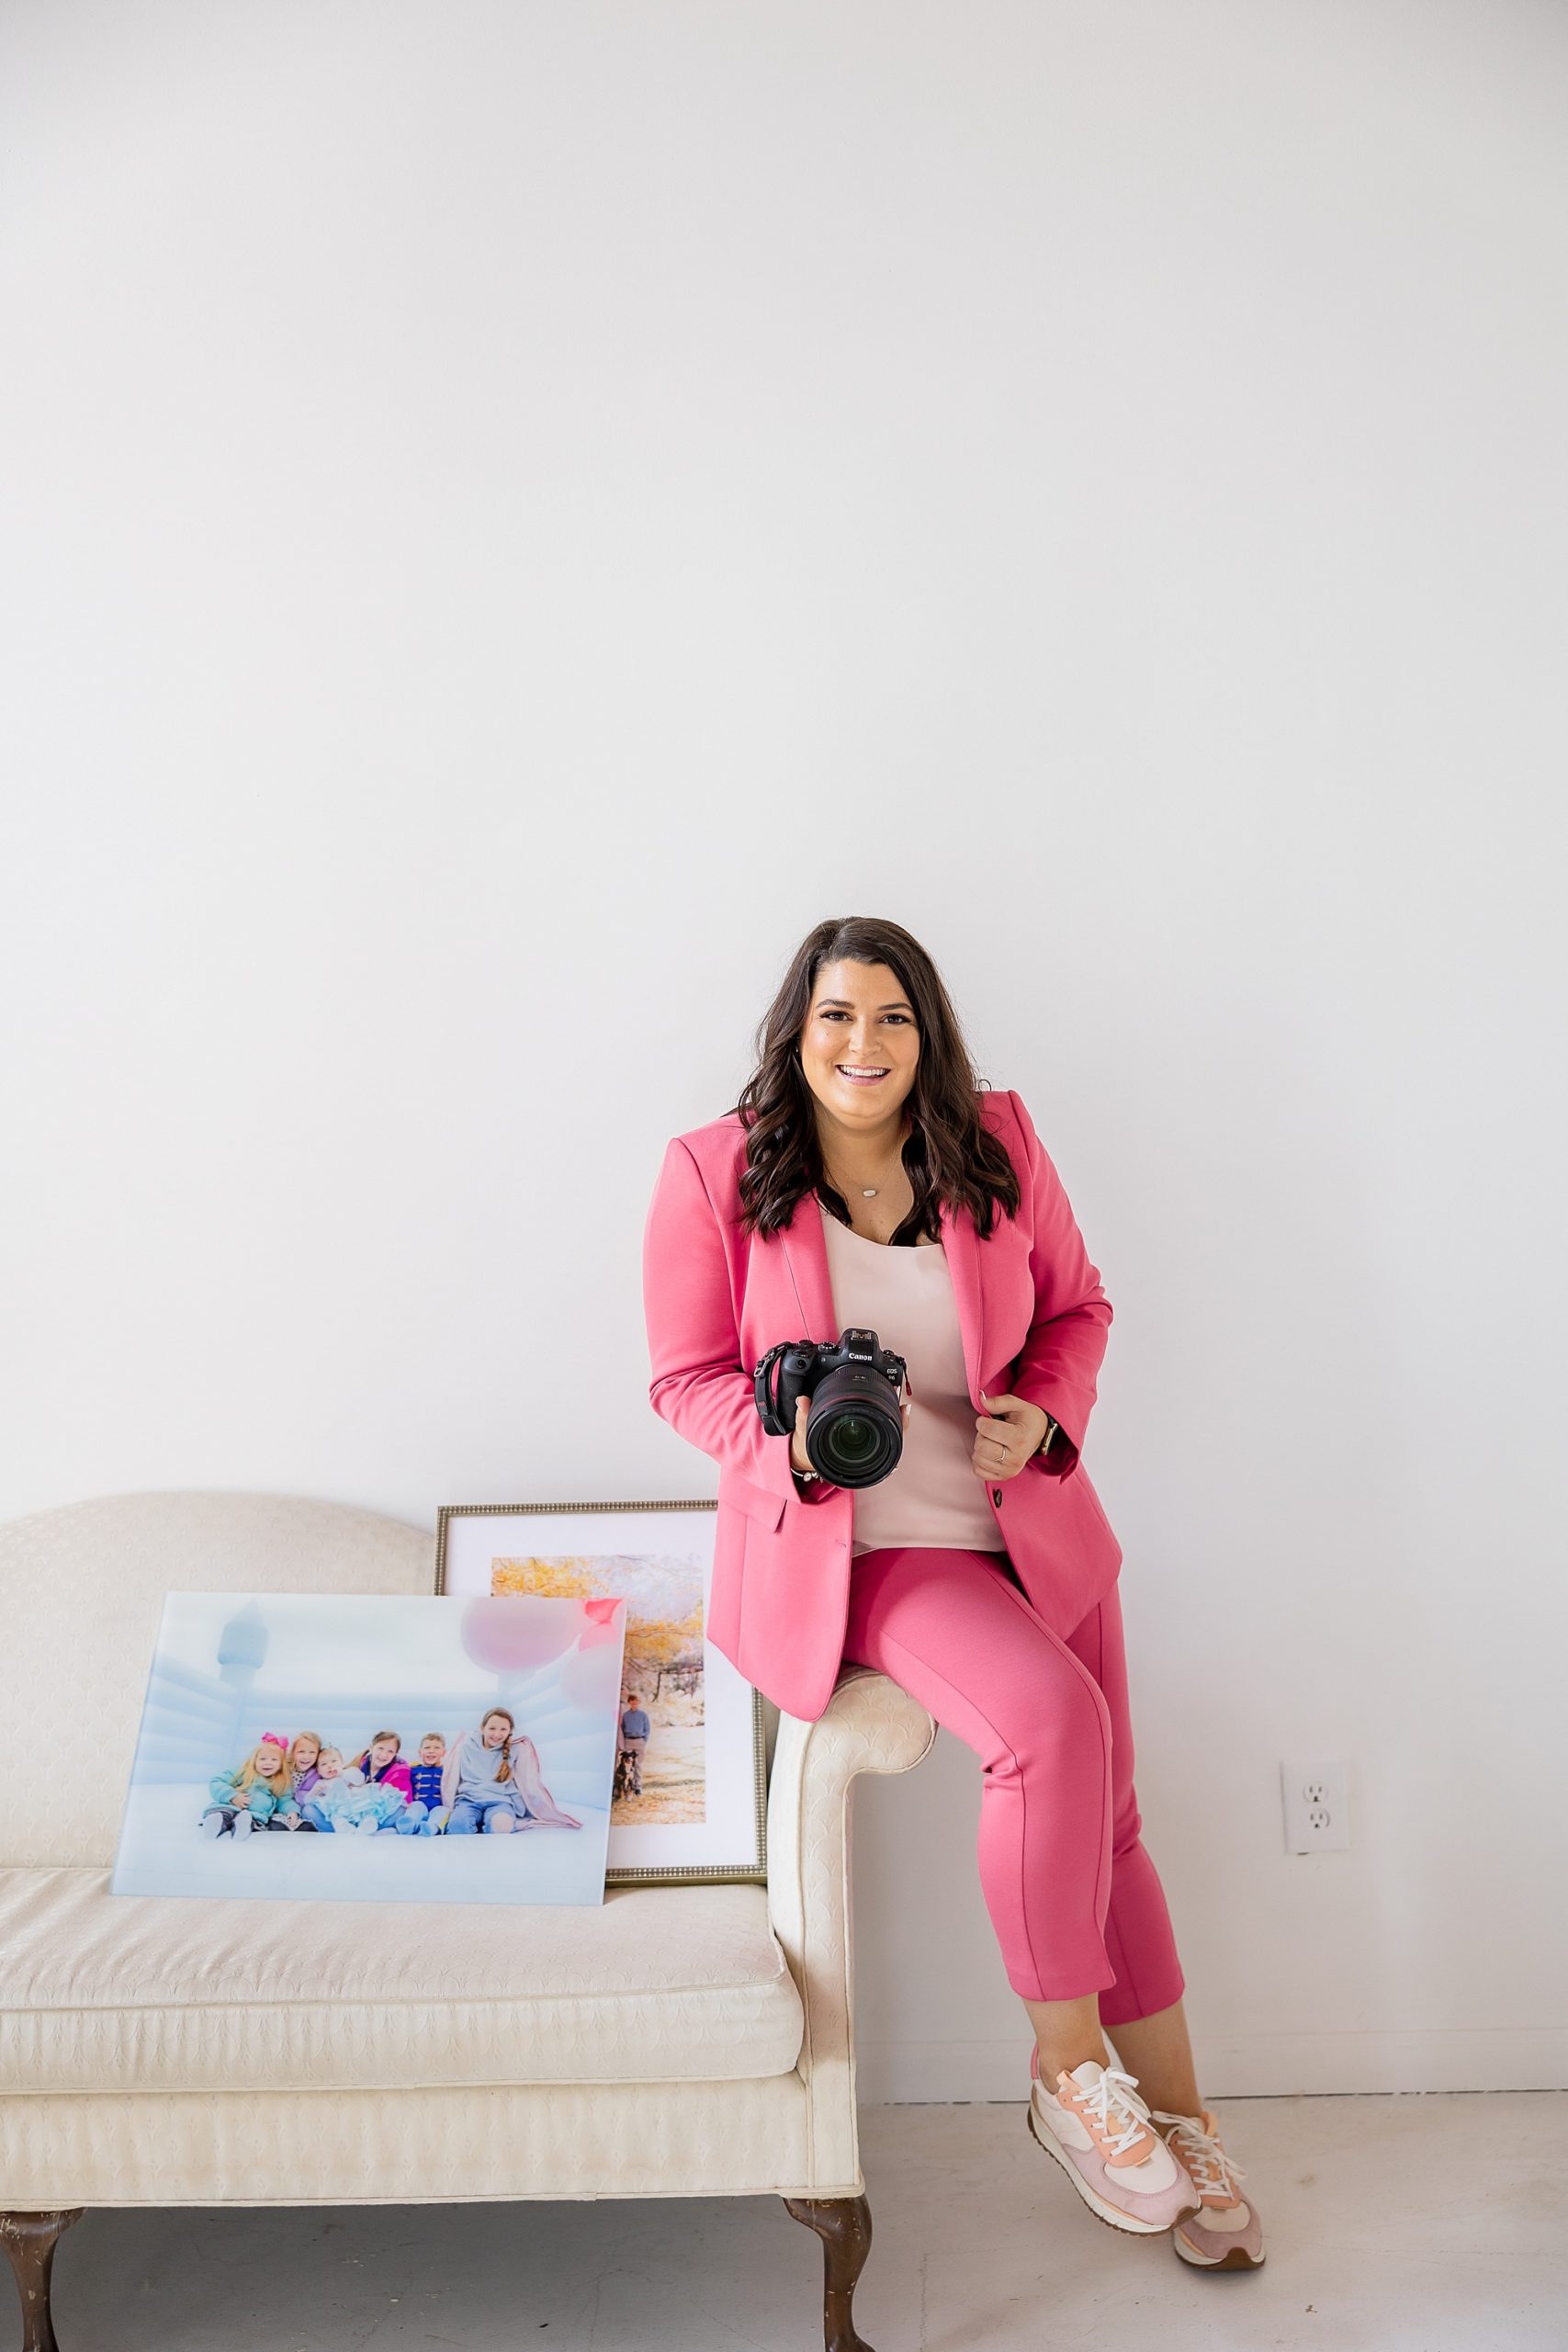 photographer in pink pantsuit holds camera and printed images in studio